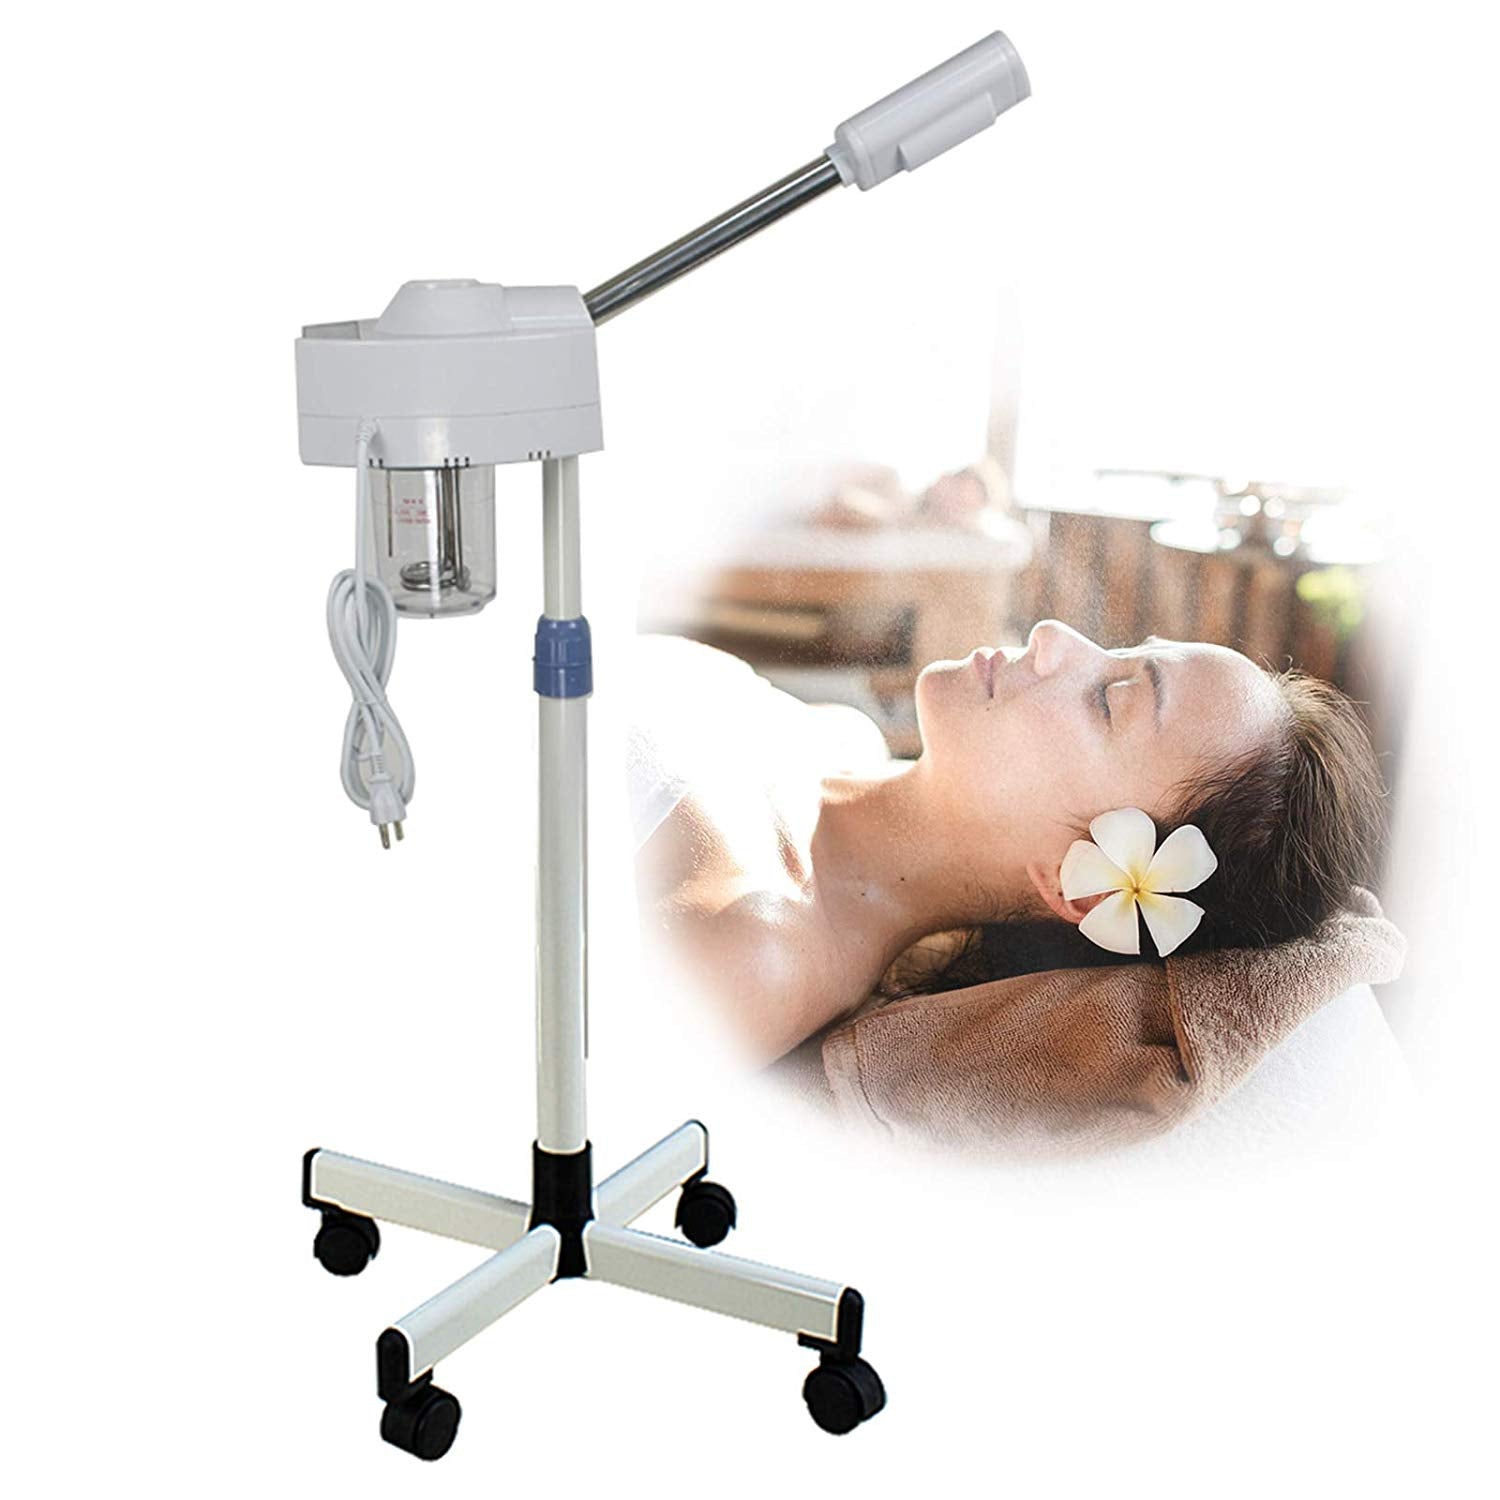 Facial Steamer On Wheels For Personal Home Salon Spa Skin Cleaning